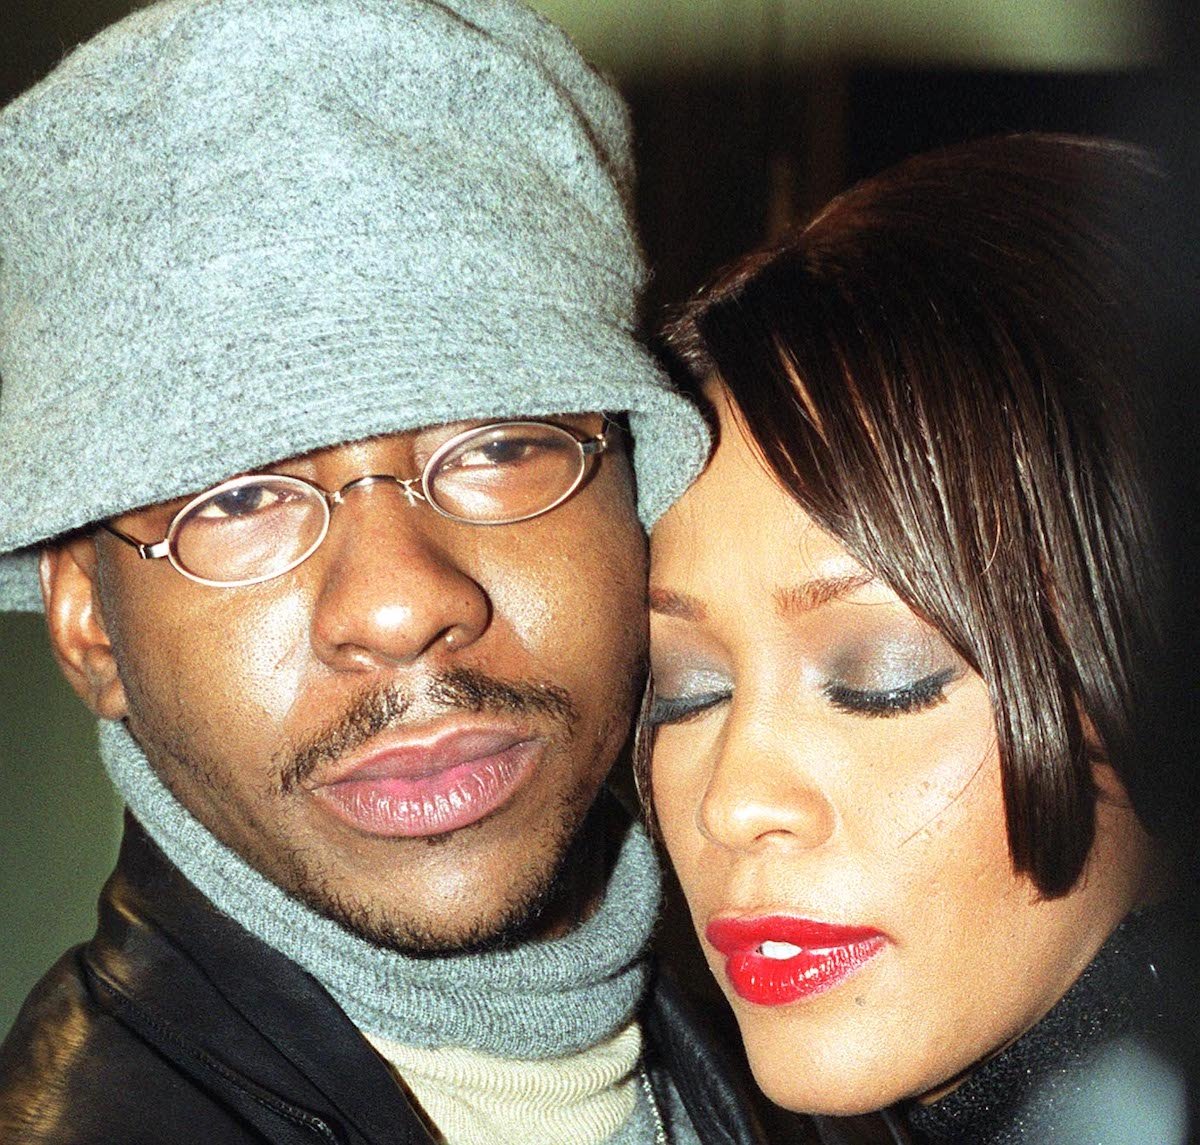 Bobby Brown and Whitney Houston embrace one another